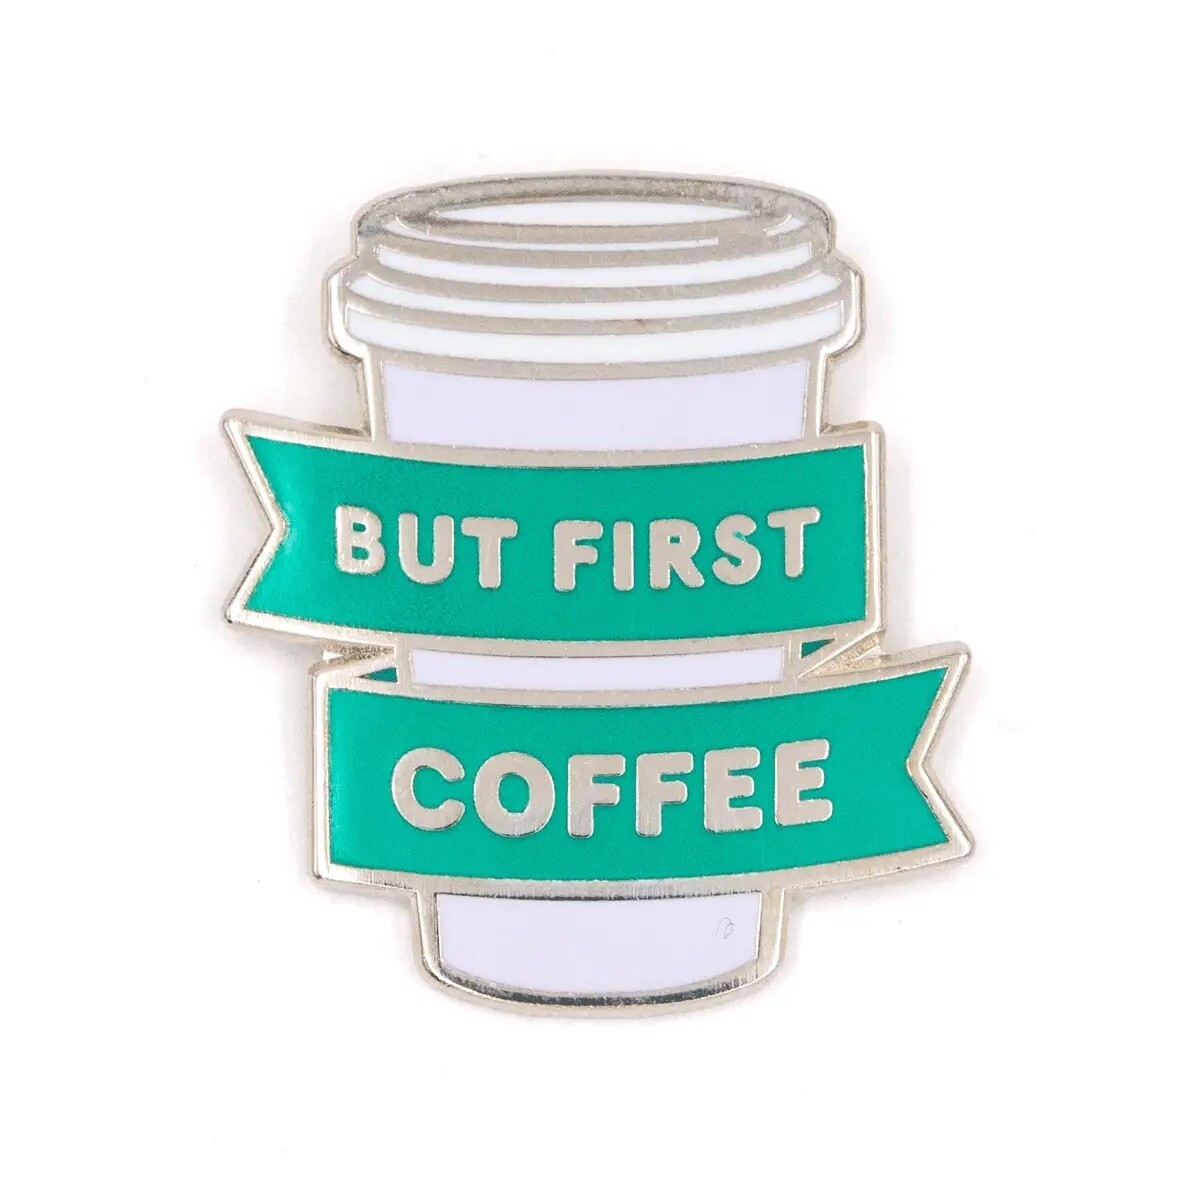 BUT FIRST COFFEE - Enamel Pin by These Are Things